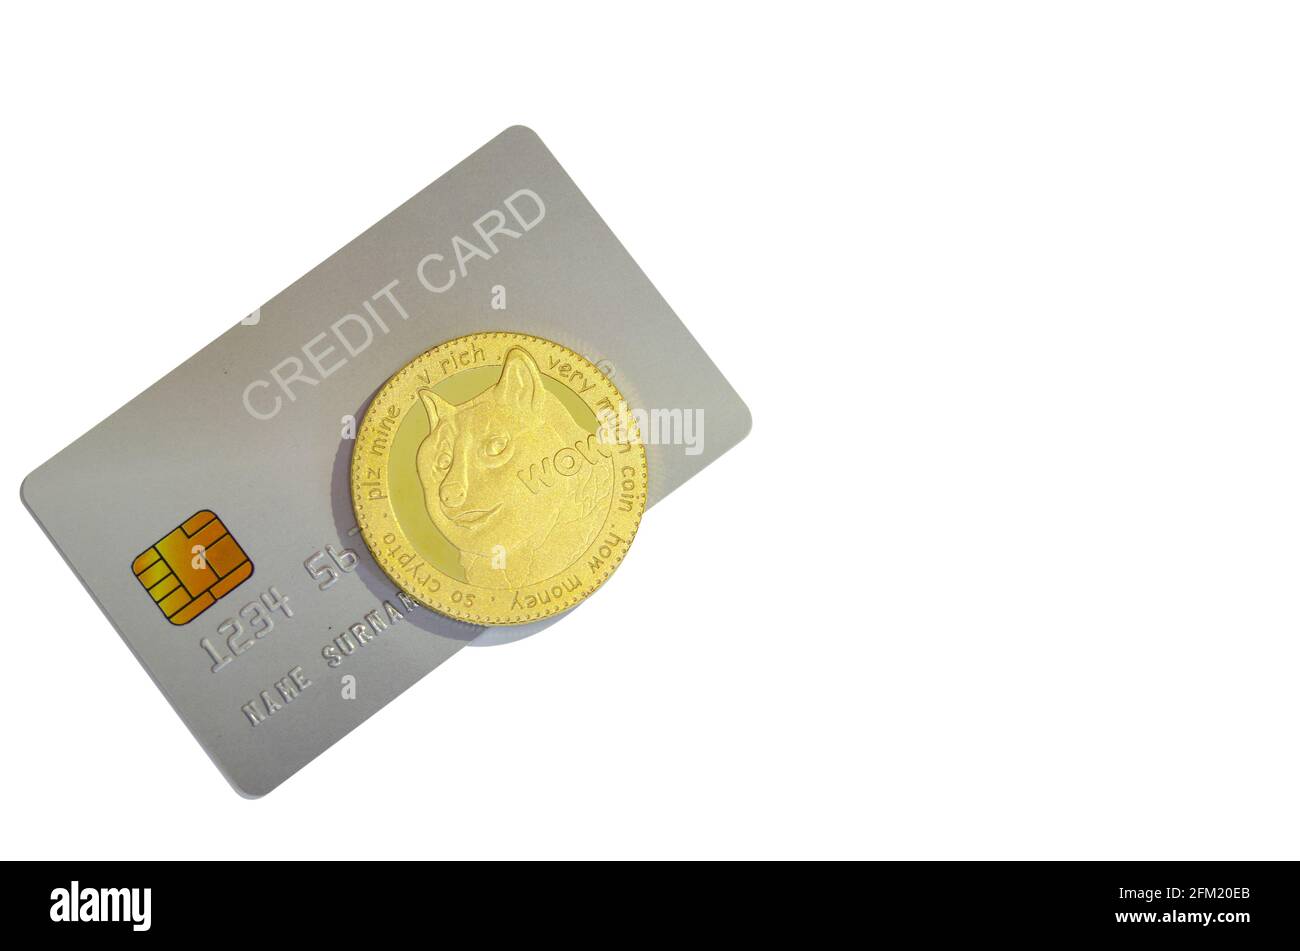 Dogecoin and credit cards isolated on white background. Stock Photo